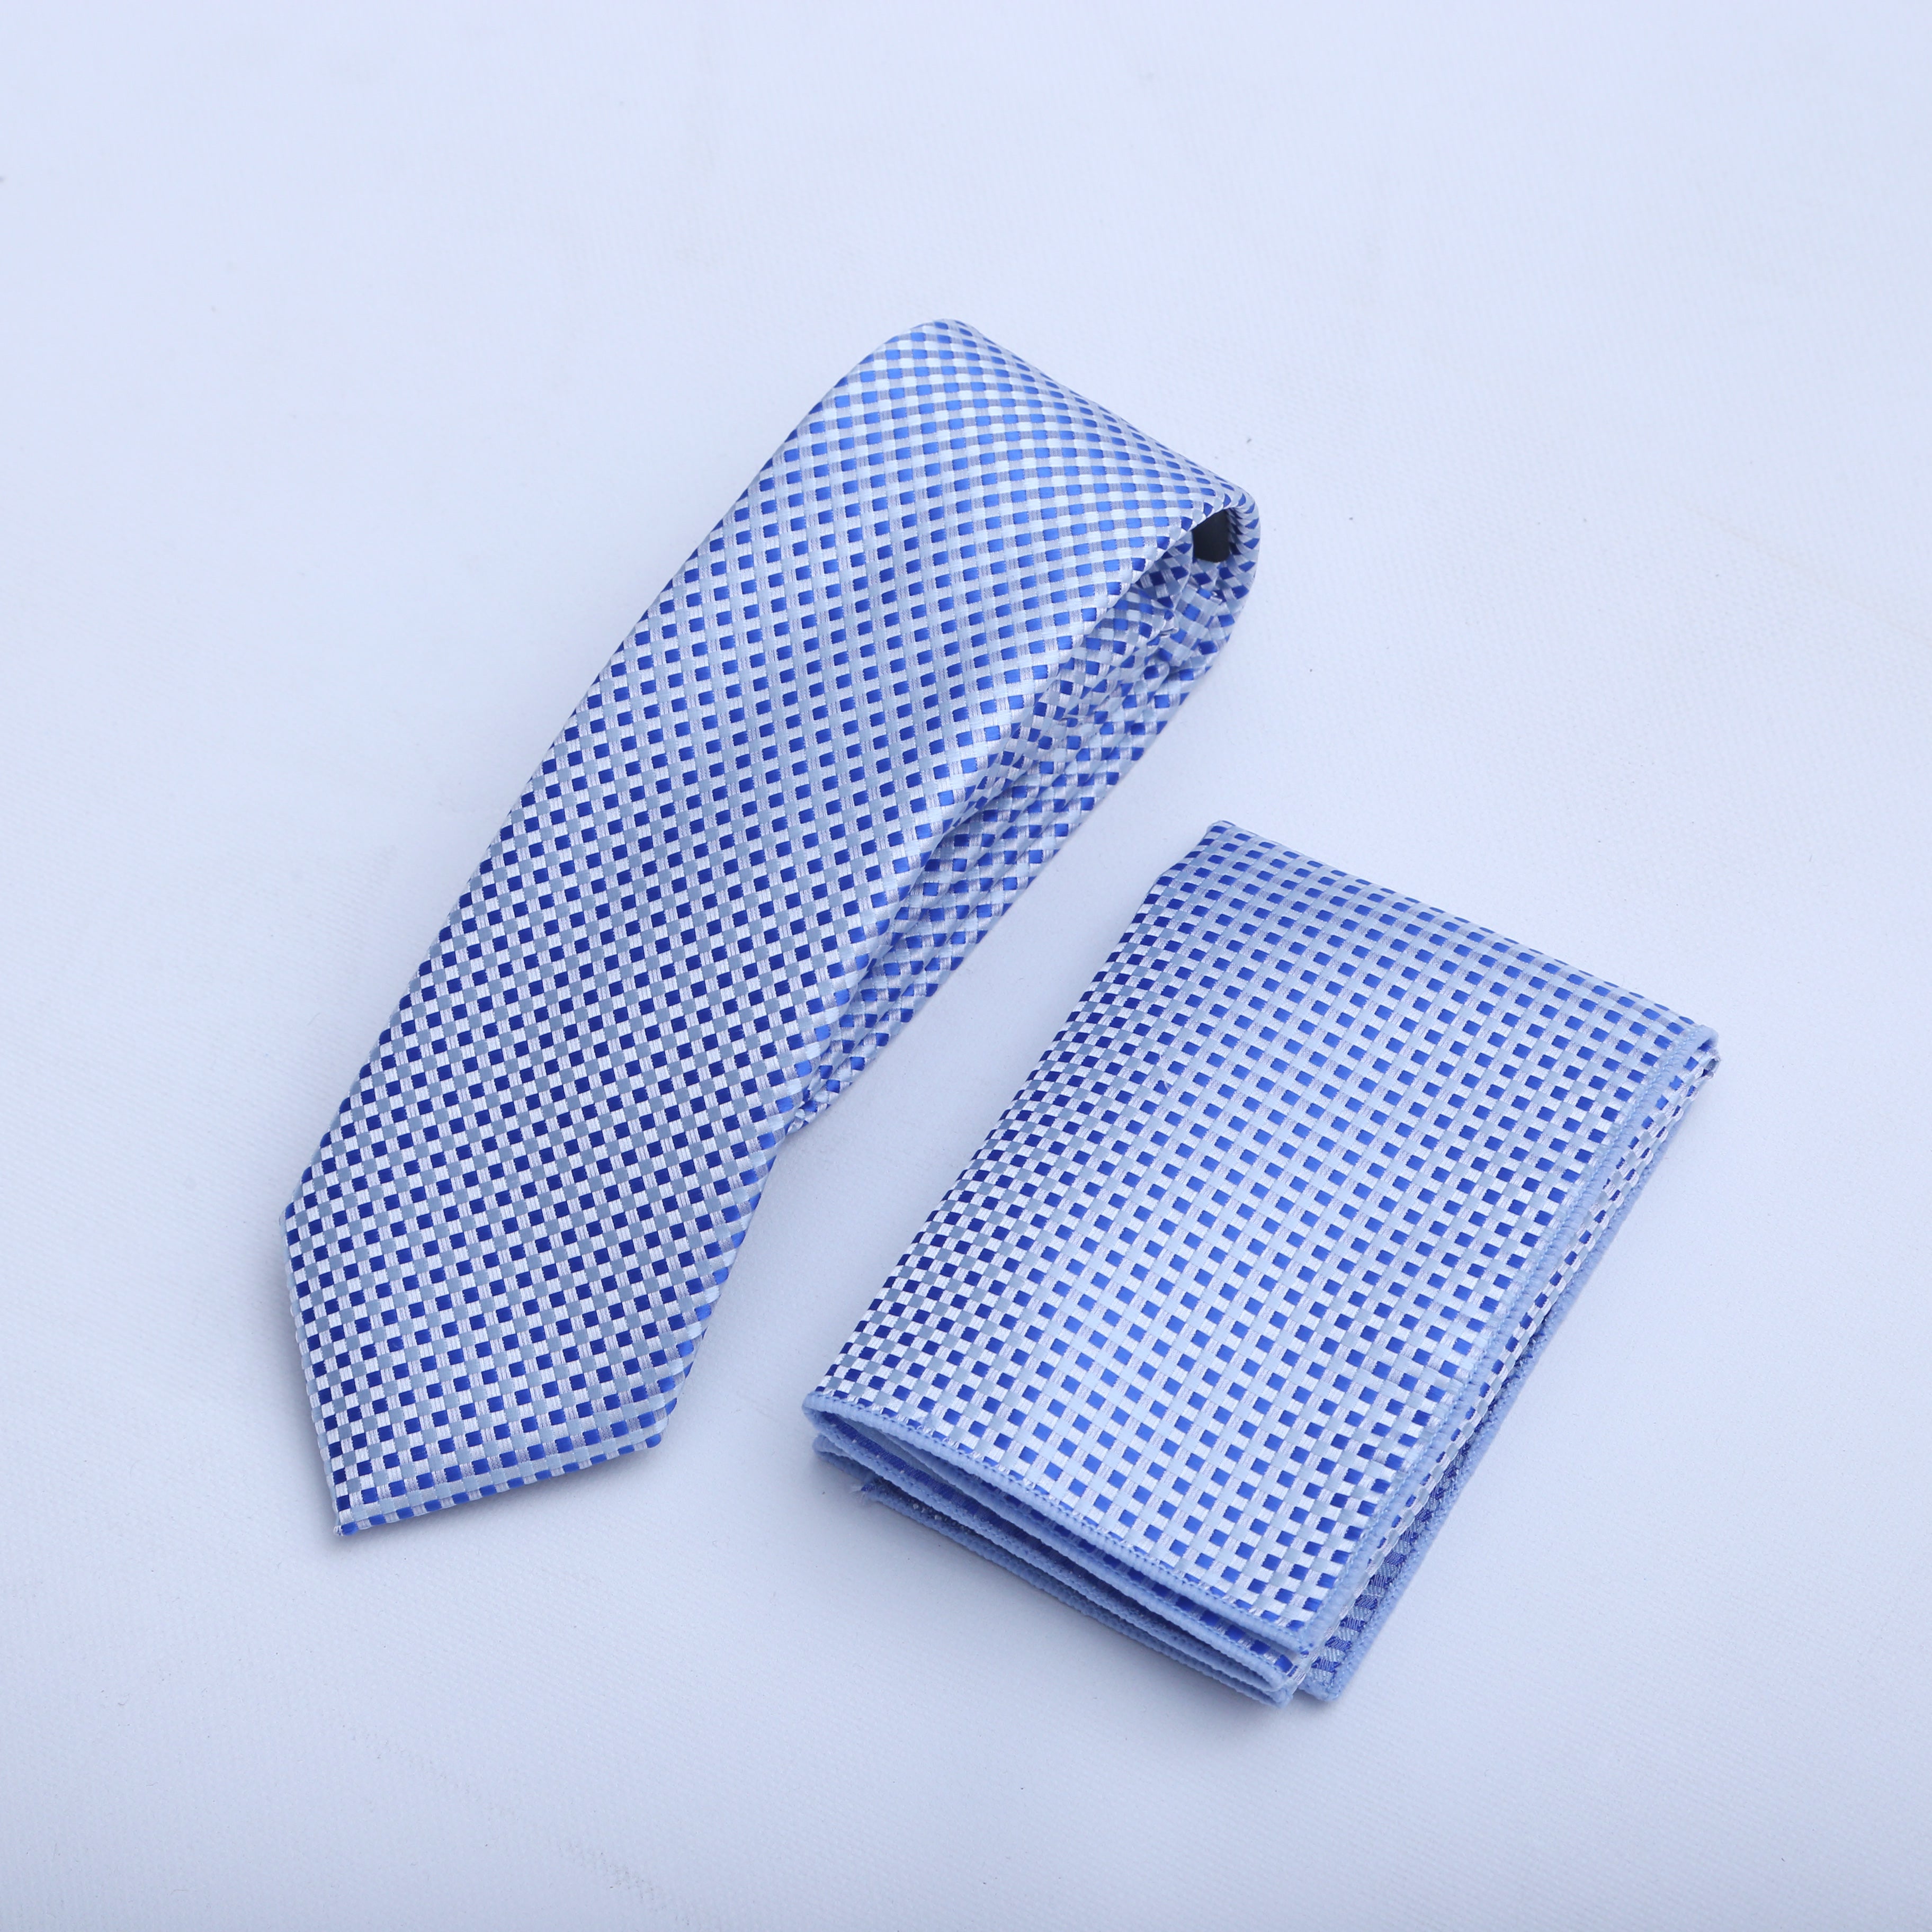 LIGHT BLUE TIE AND POCKET SQUARE